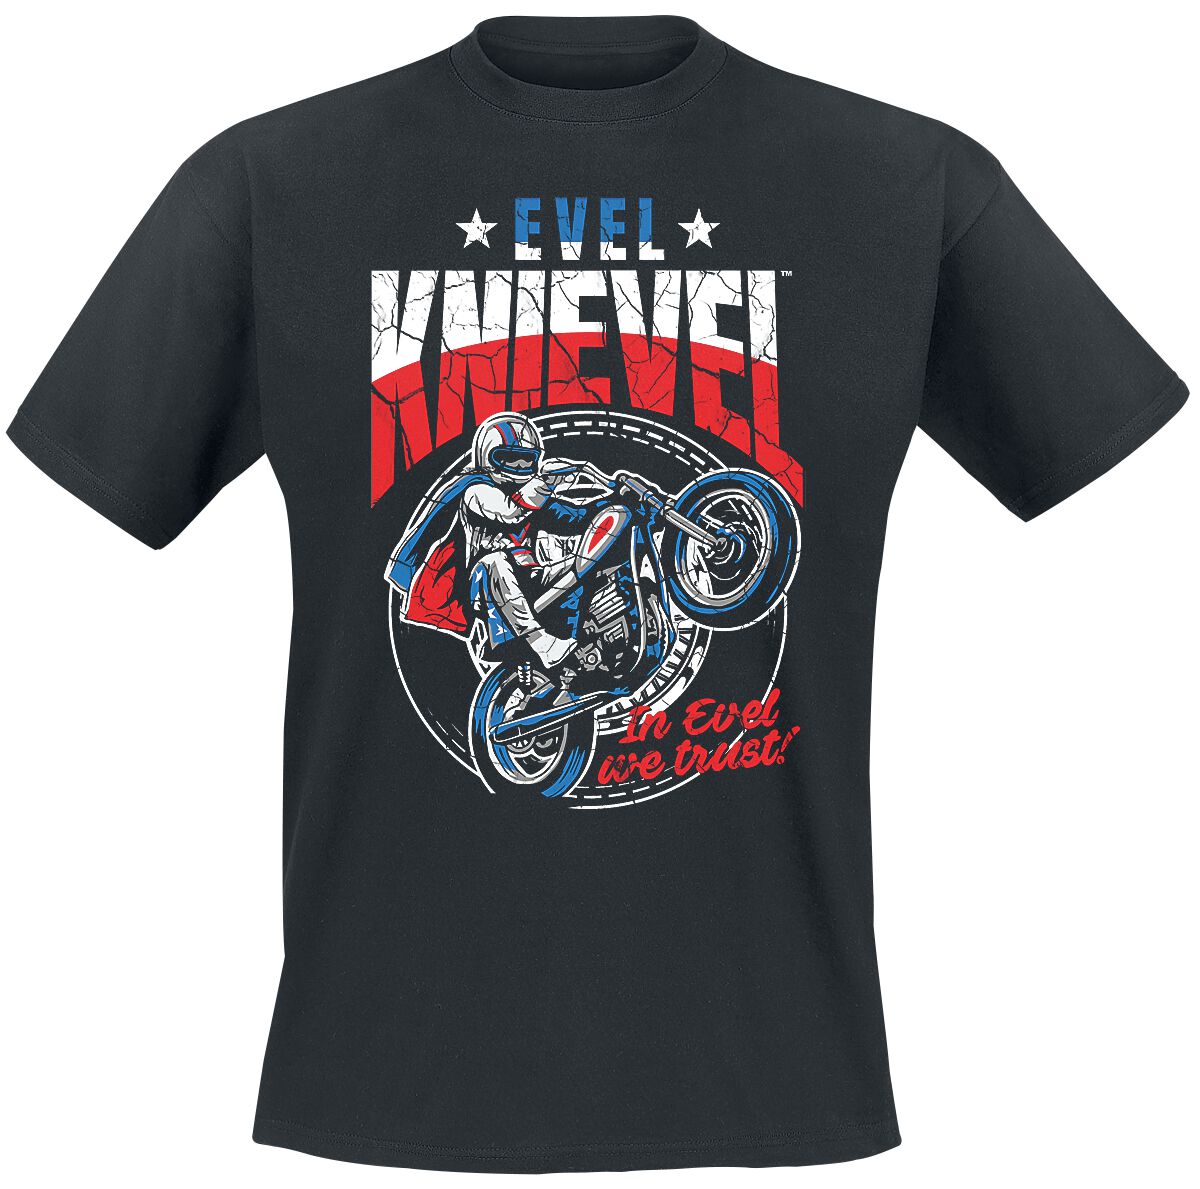 Evel Knievel In Evel We Trust! T-Shirt black